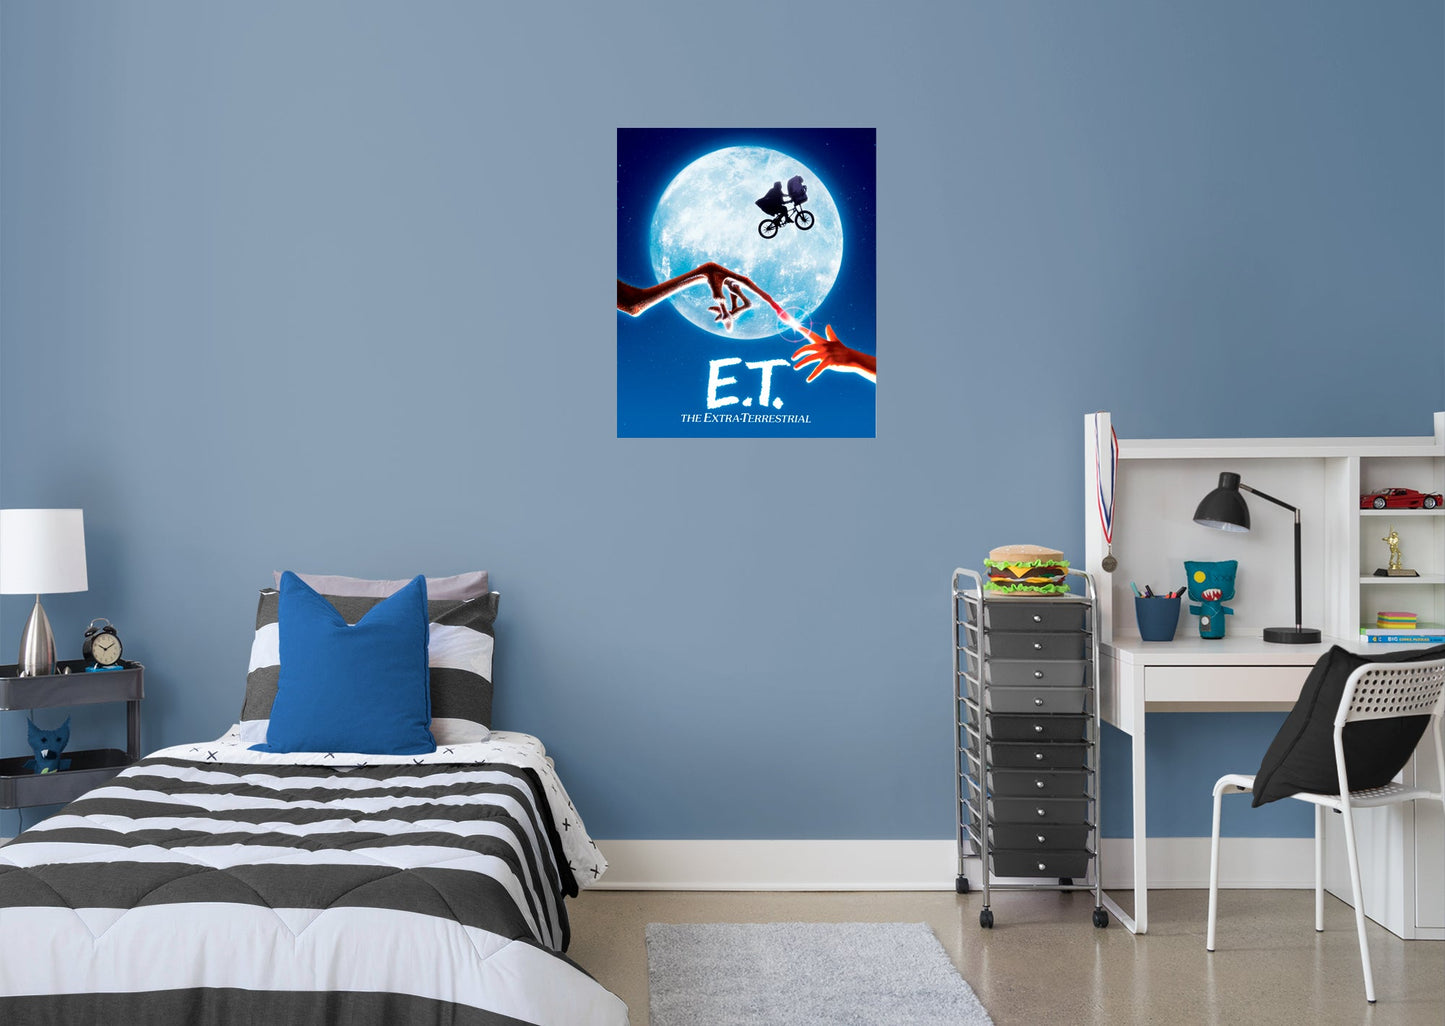 E.T.:  Movie Poster Mural        - Officially Licensed NBC Universal Removable Wall   Adhesive Decal